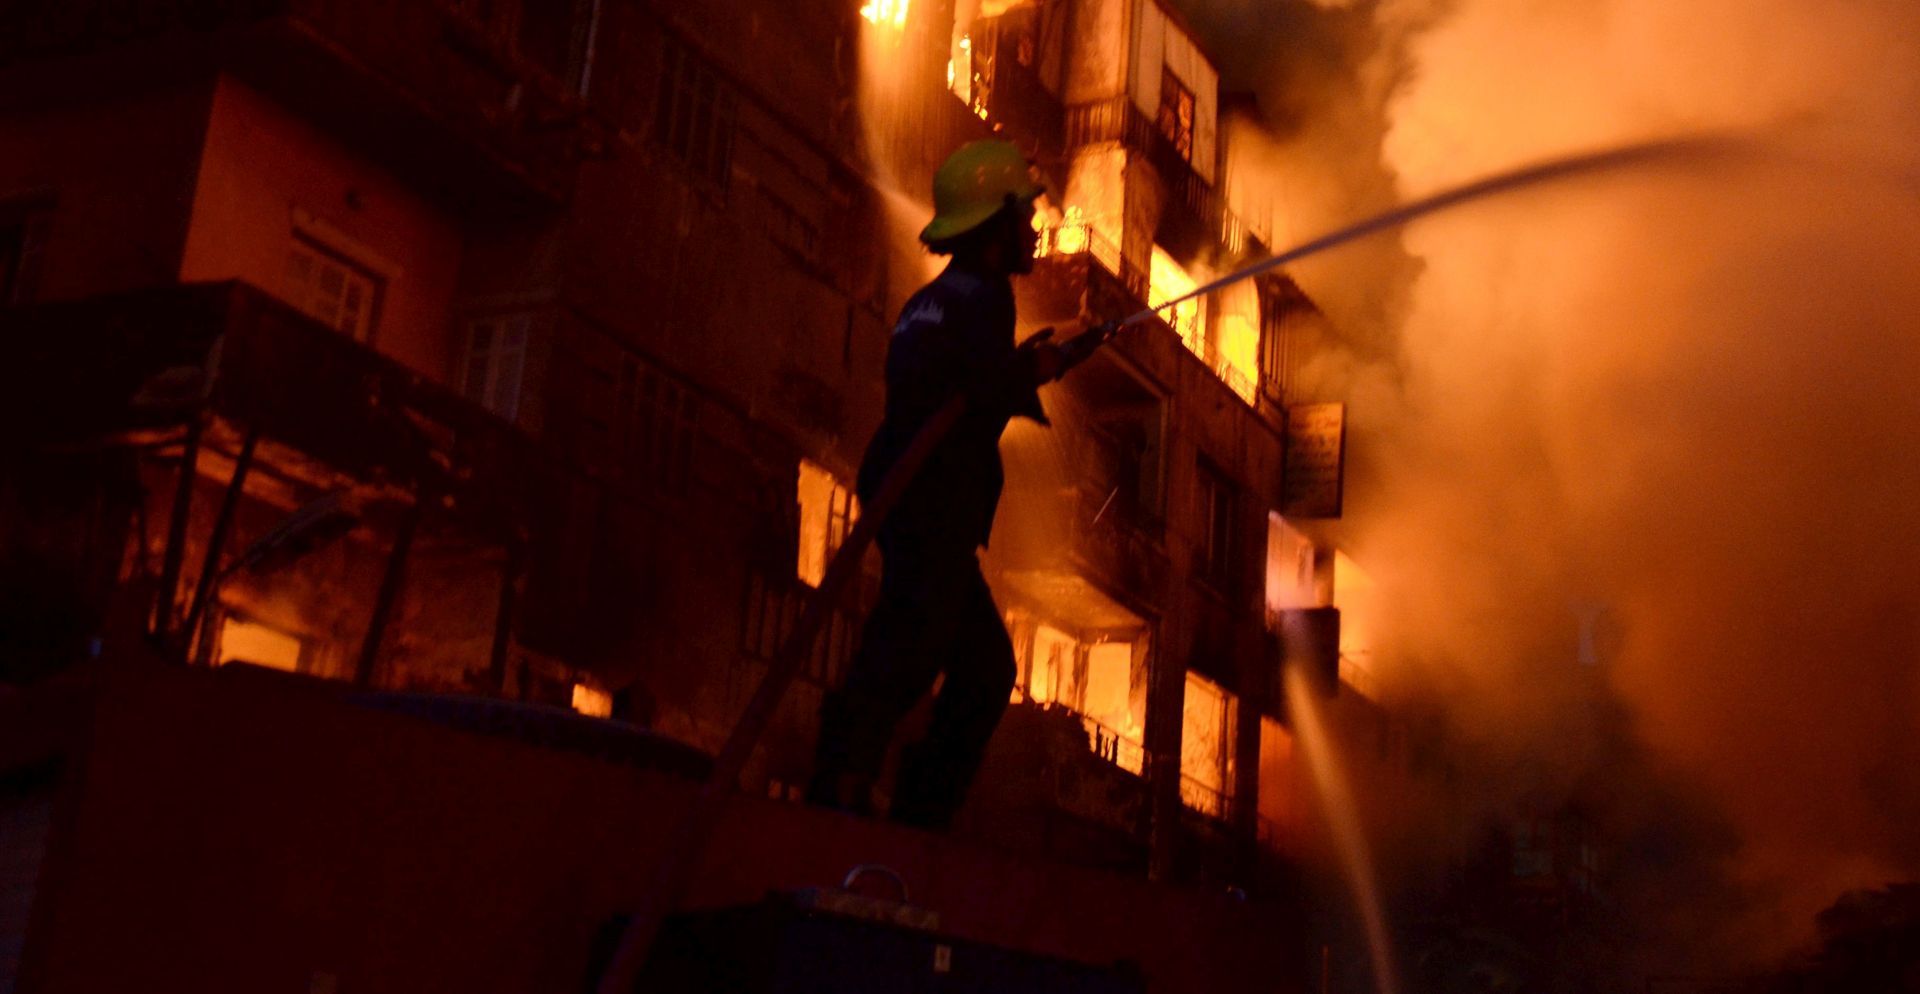 epa05296070 Egyptian firefighters try to extinguish a fire that engulfed several buildings in Cairo, Egypt, 09 May 2016. According to reports, 50 people were injured, including firefighters, when an overnight fire at a small hotel in Ataba neighborhood spread to other buildings and markets in the old area of Cairo.  EPA/AYMAN AREF EGYPT OUT